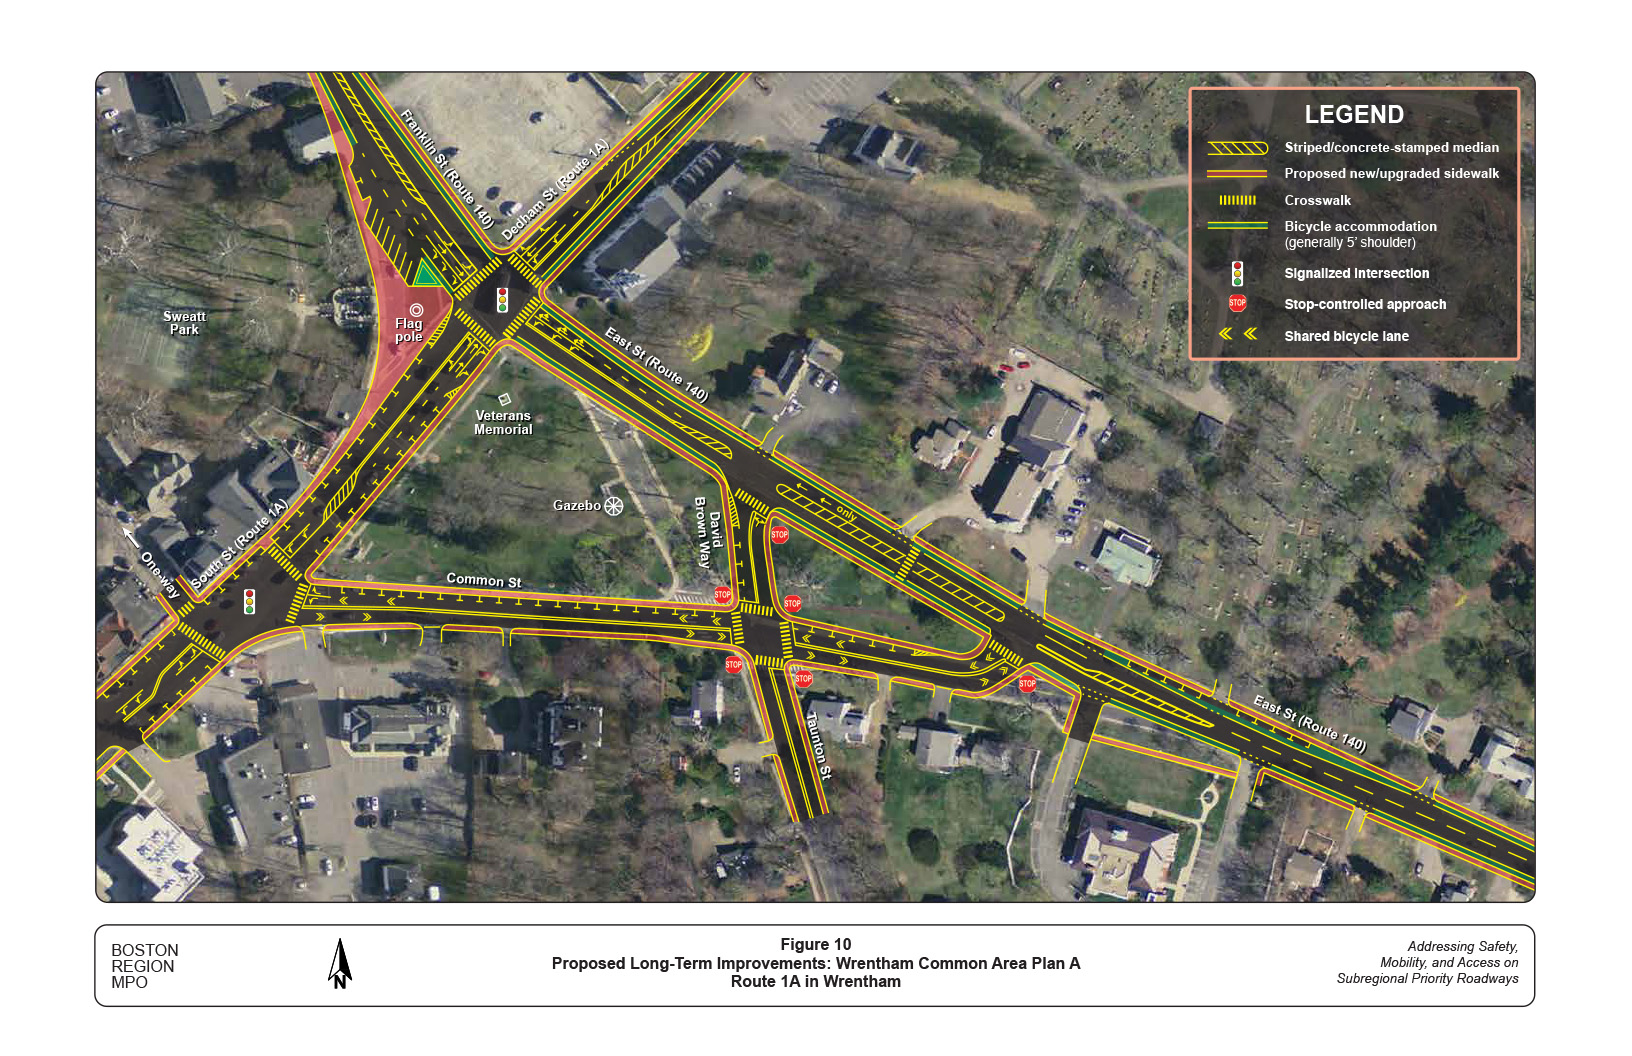 Figure 10 is a map that illustrates the proposed long-term improvements to Route 1A at the Wrentham Common area (Plan A).